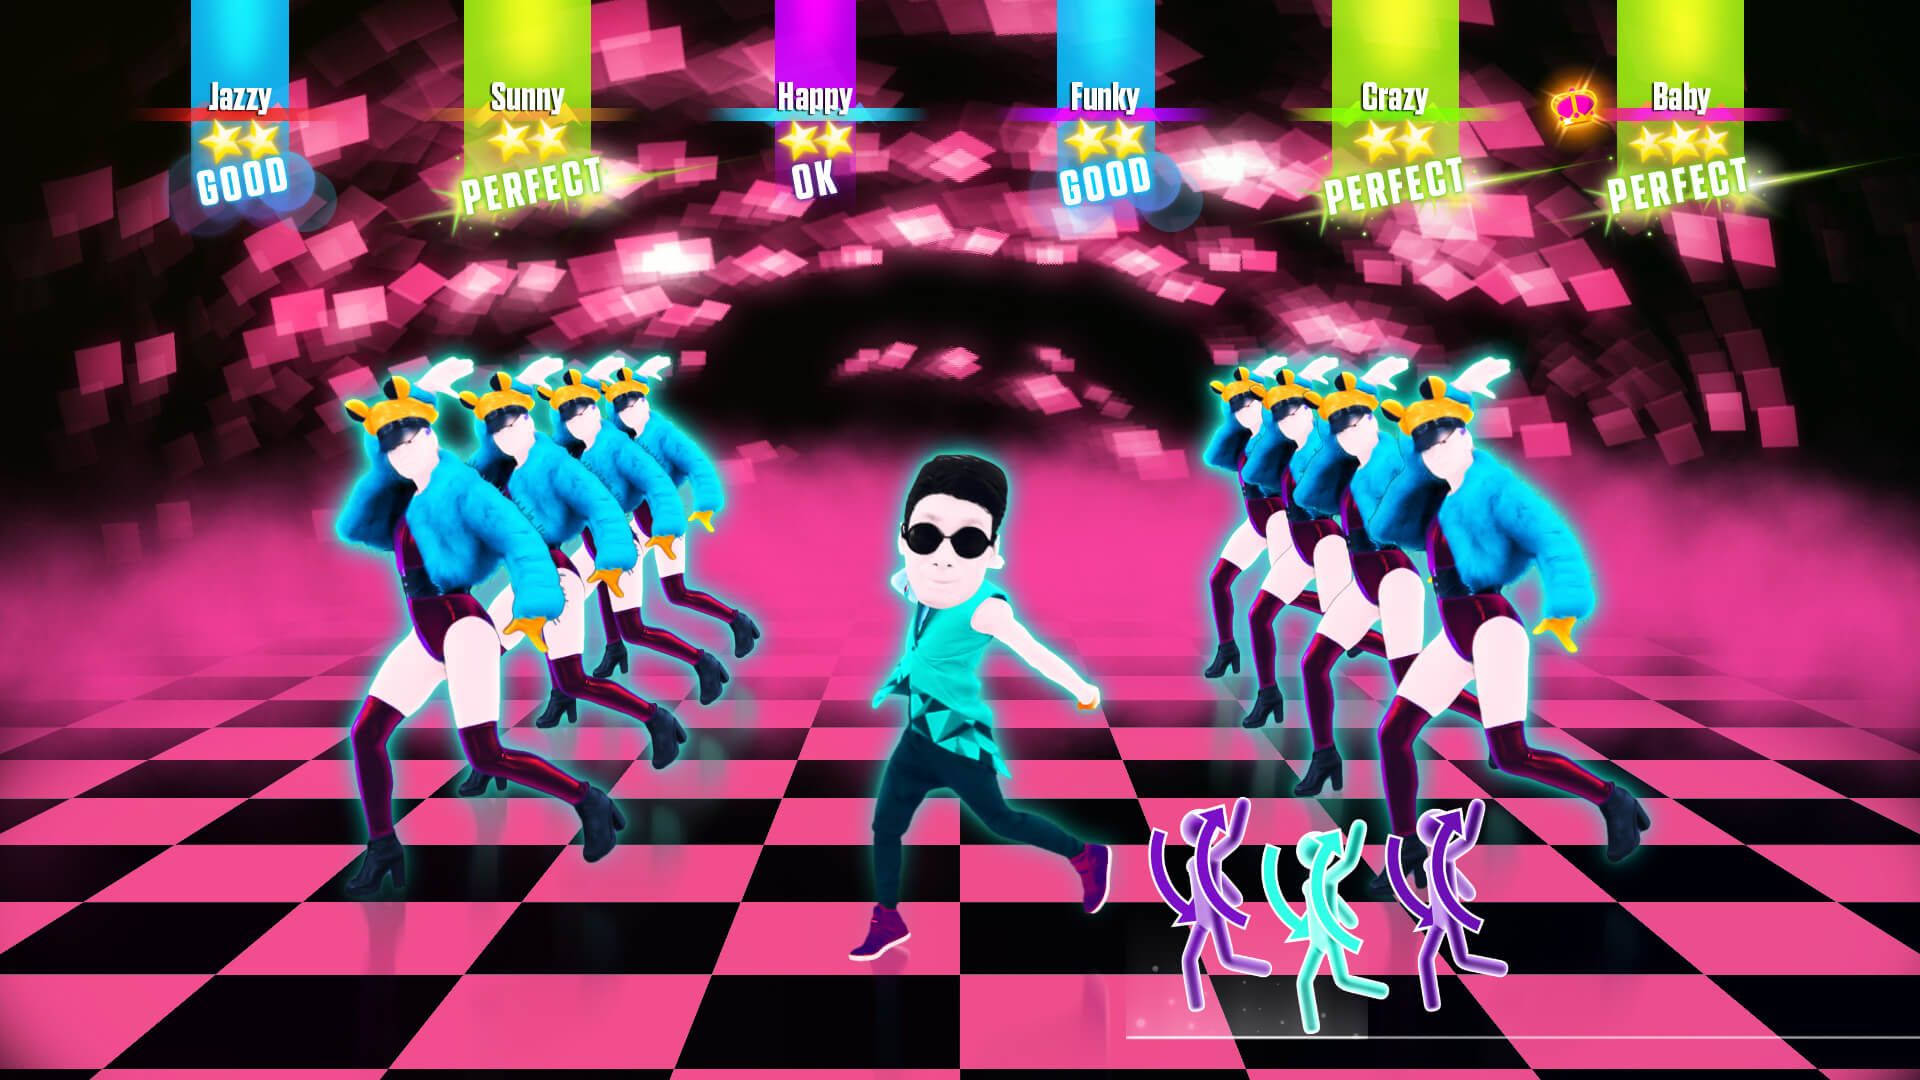 Just Dance Duplicating Dancers On Checkered Floor Background